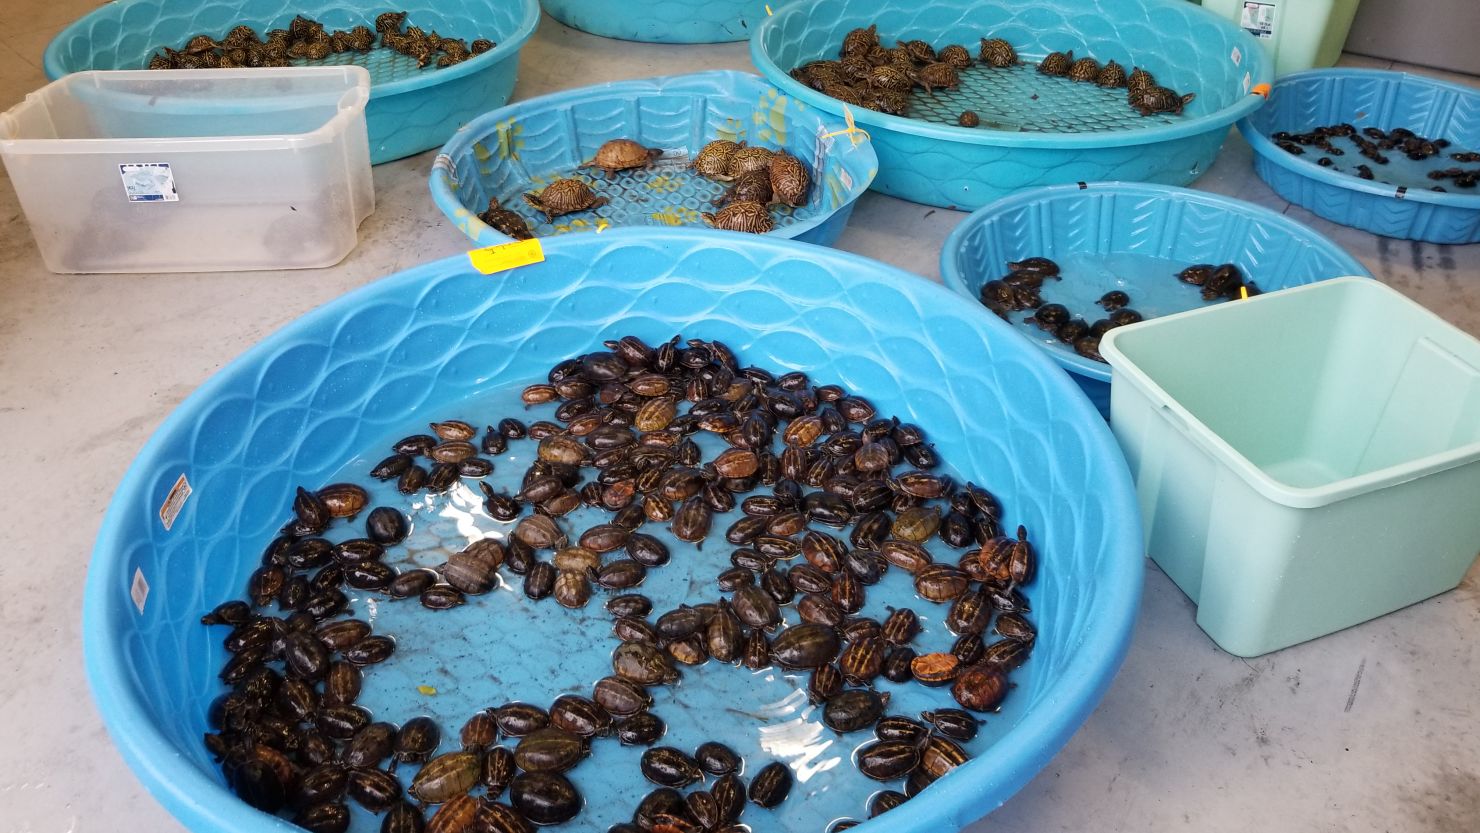 Thousands of wild turtles were being captured and sold illegally in Florida.